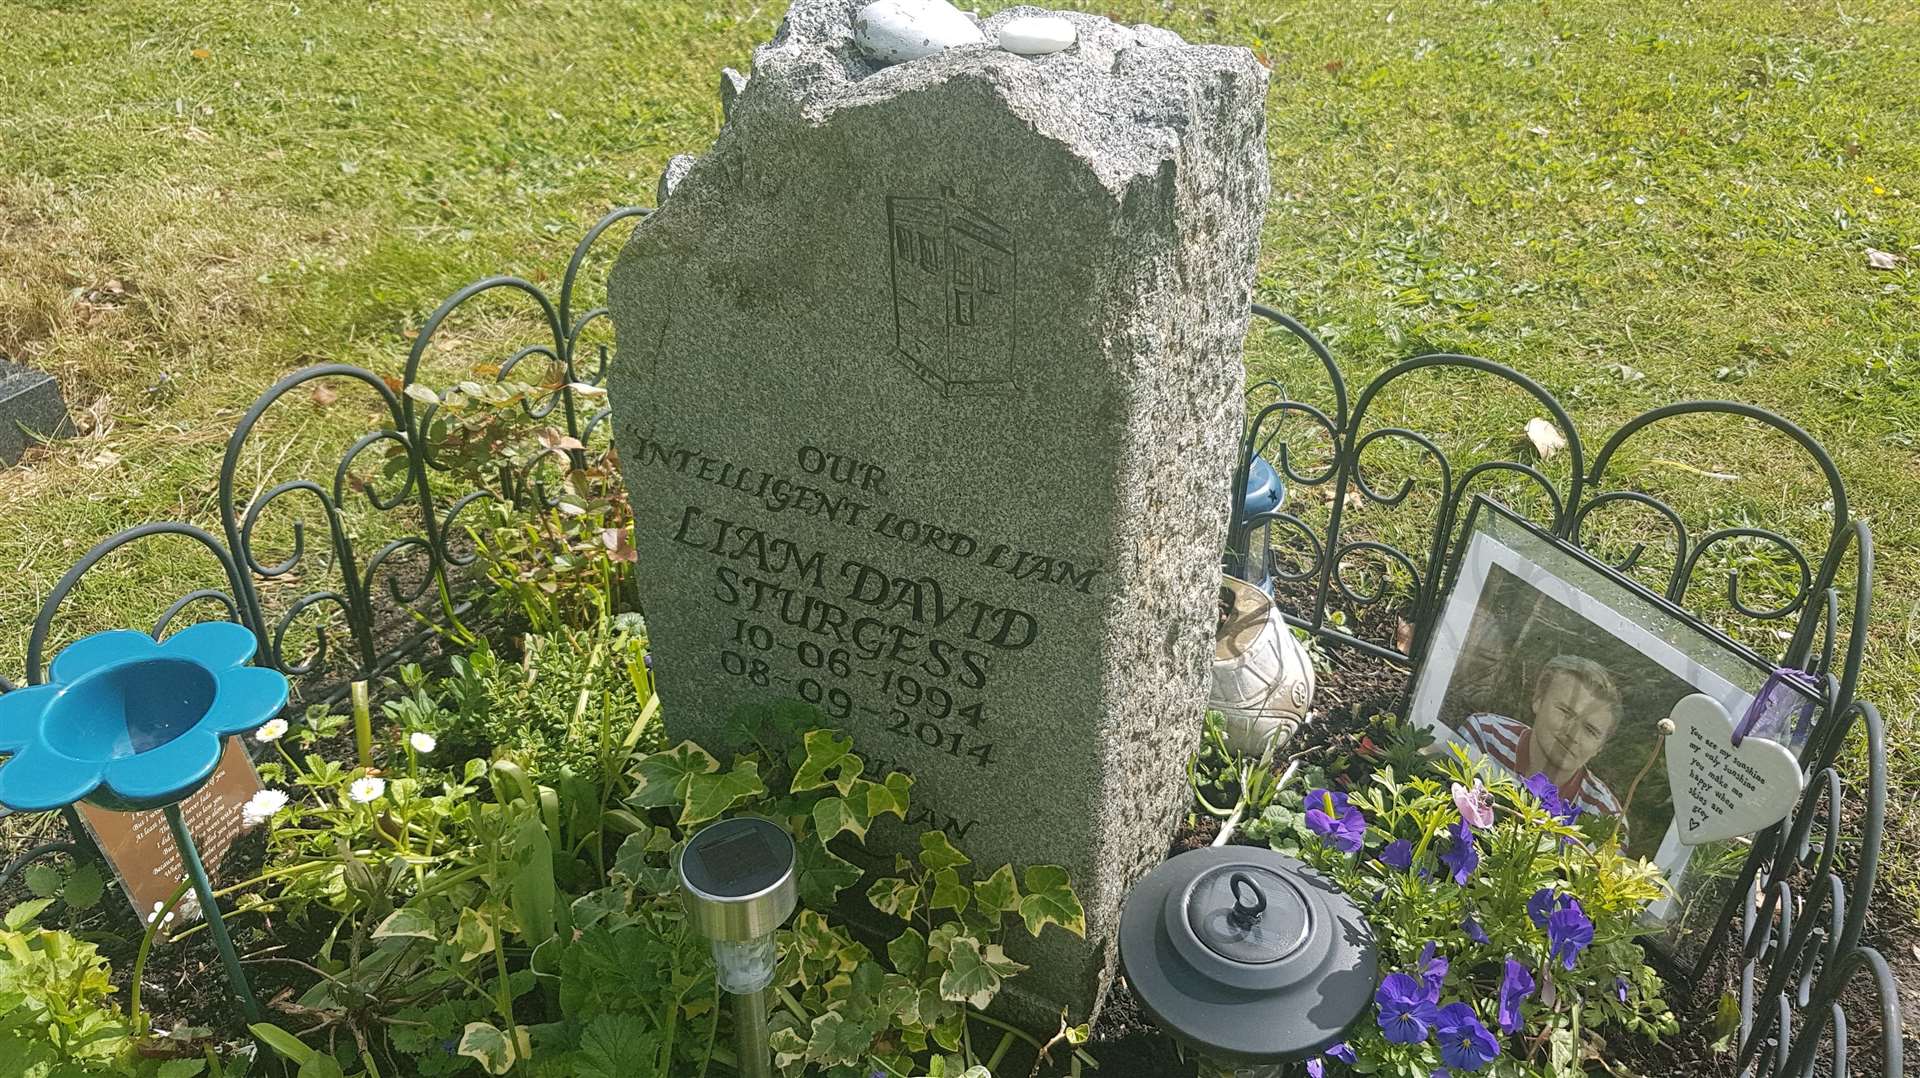 Liam was a big Doctor Who fan, as highlighted by his headstone